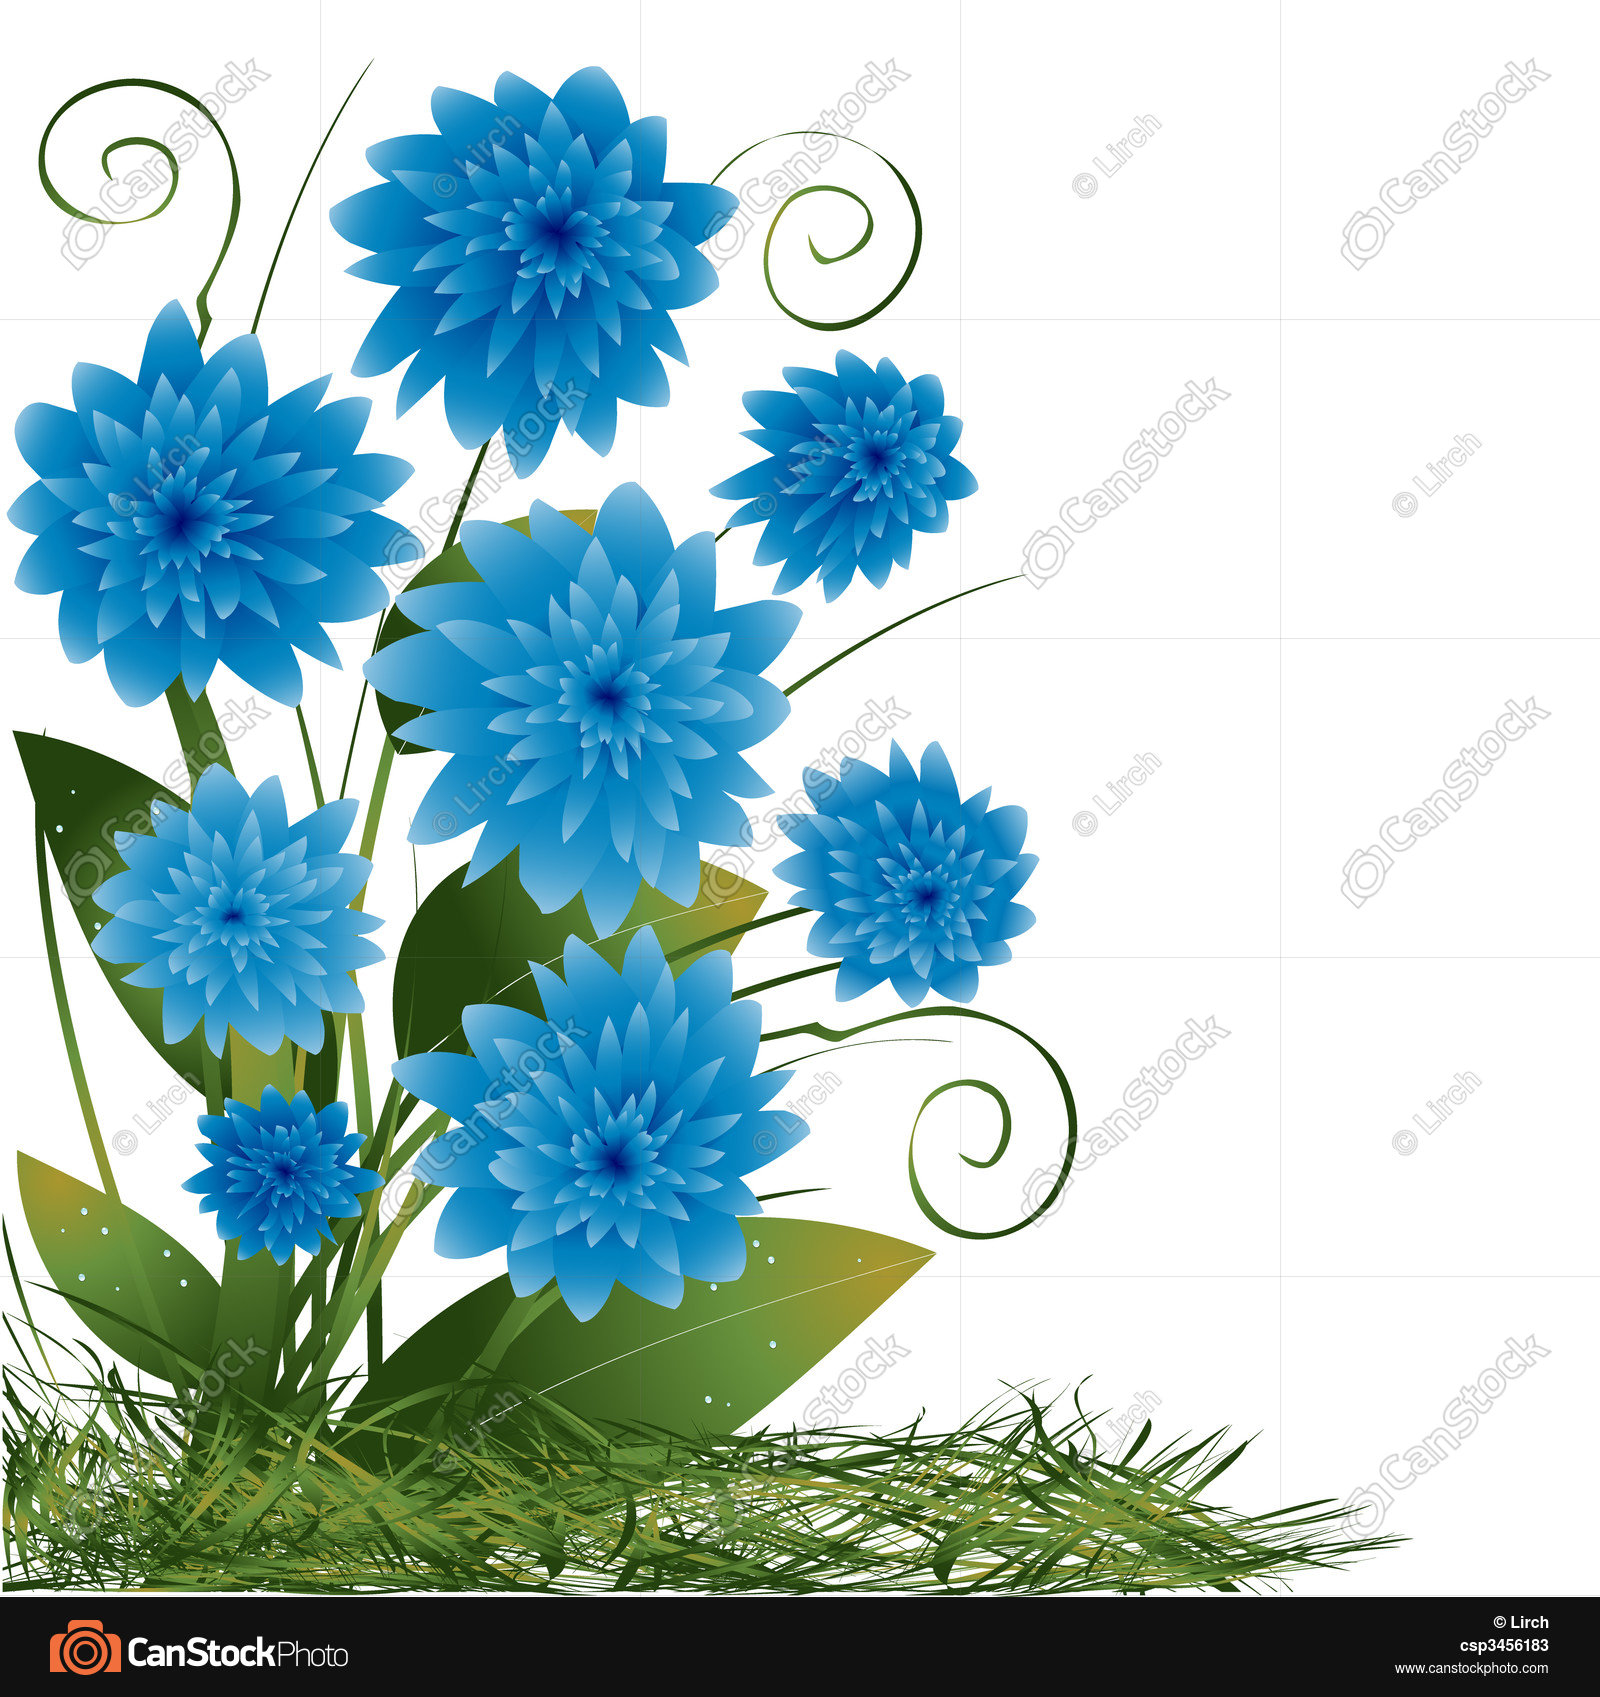 Blue flowers on a white background vectors - Search Clip Art ...